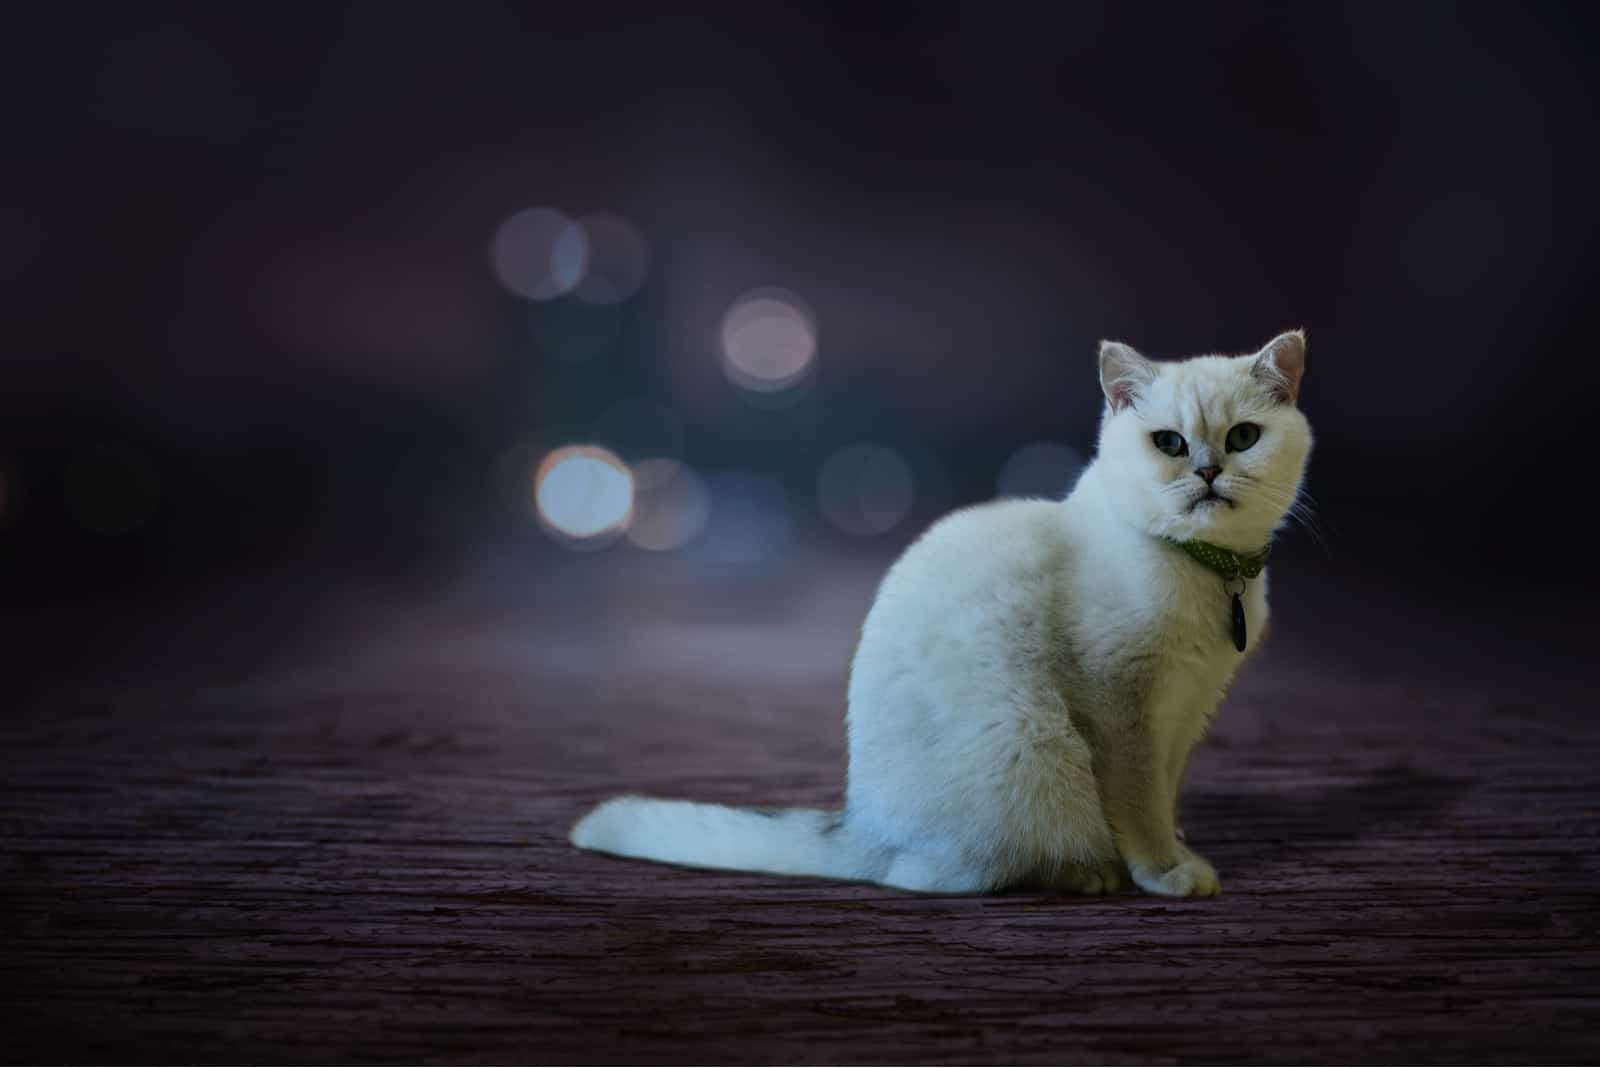 A white cat sitting alone on the street